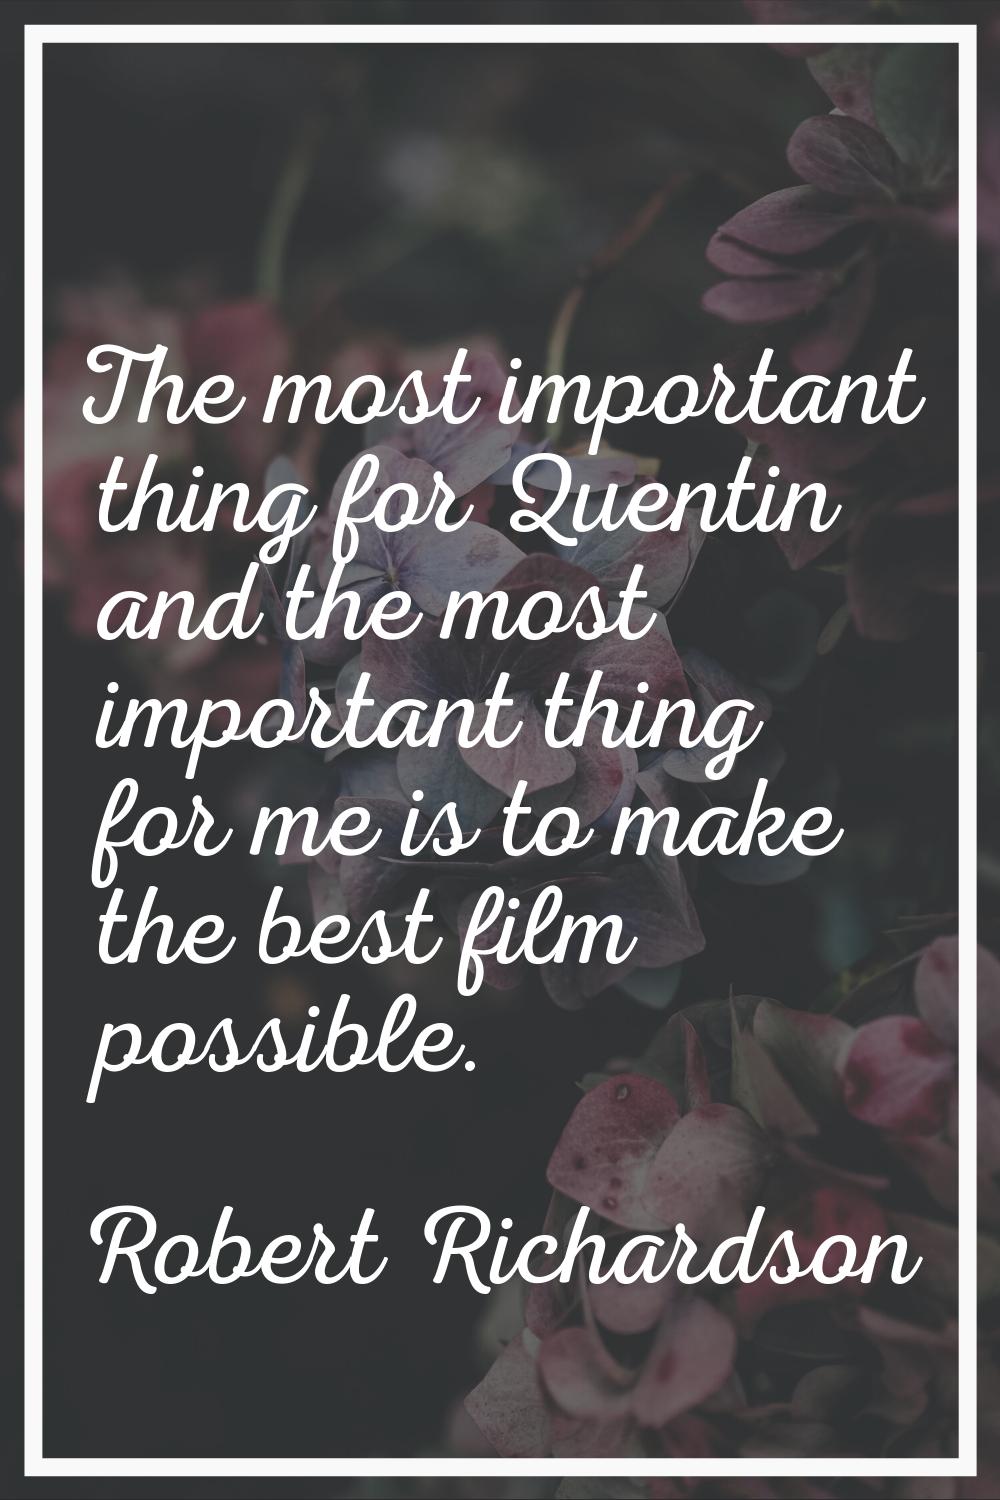 The most important thing for Quentin and the most important thing for me is to make the best film p